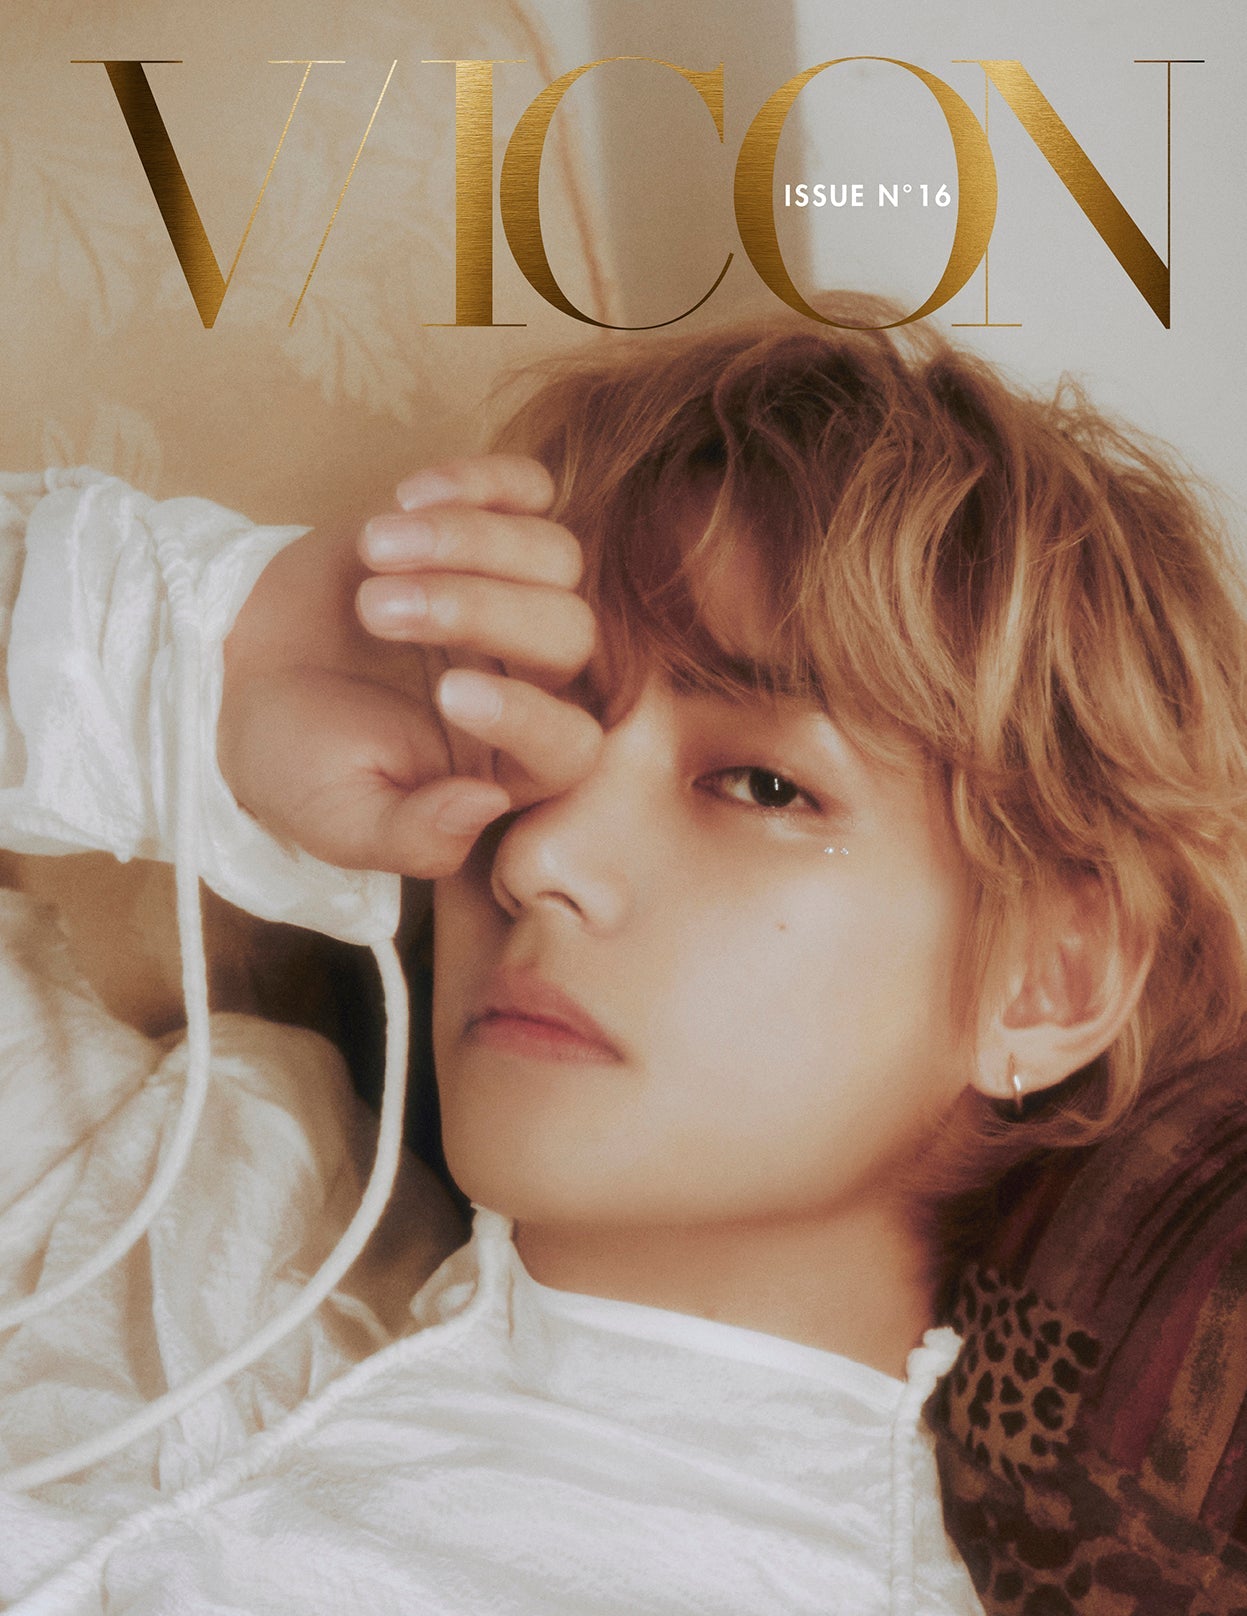 DICON ISSUE N°16 V : VICON 「a magazine about V」C-type – 光文社K ...